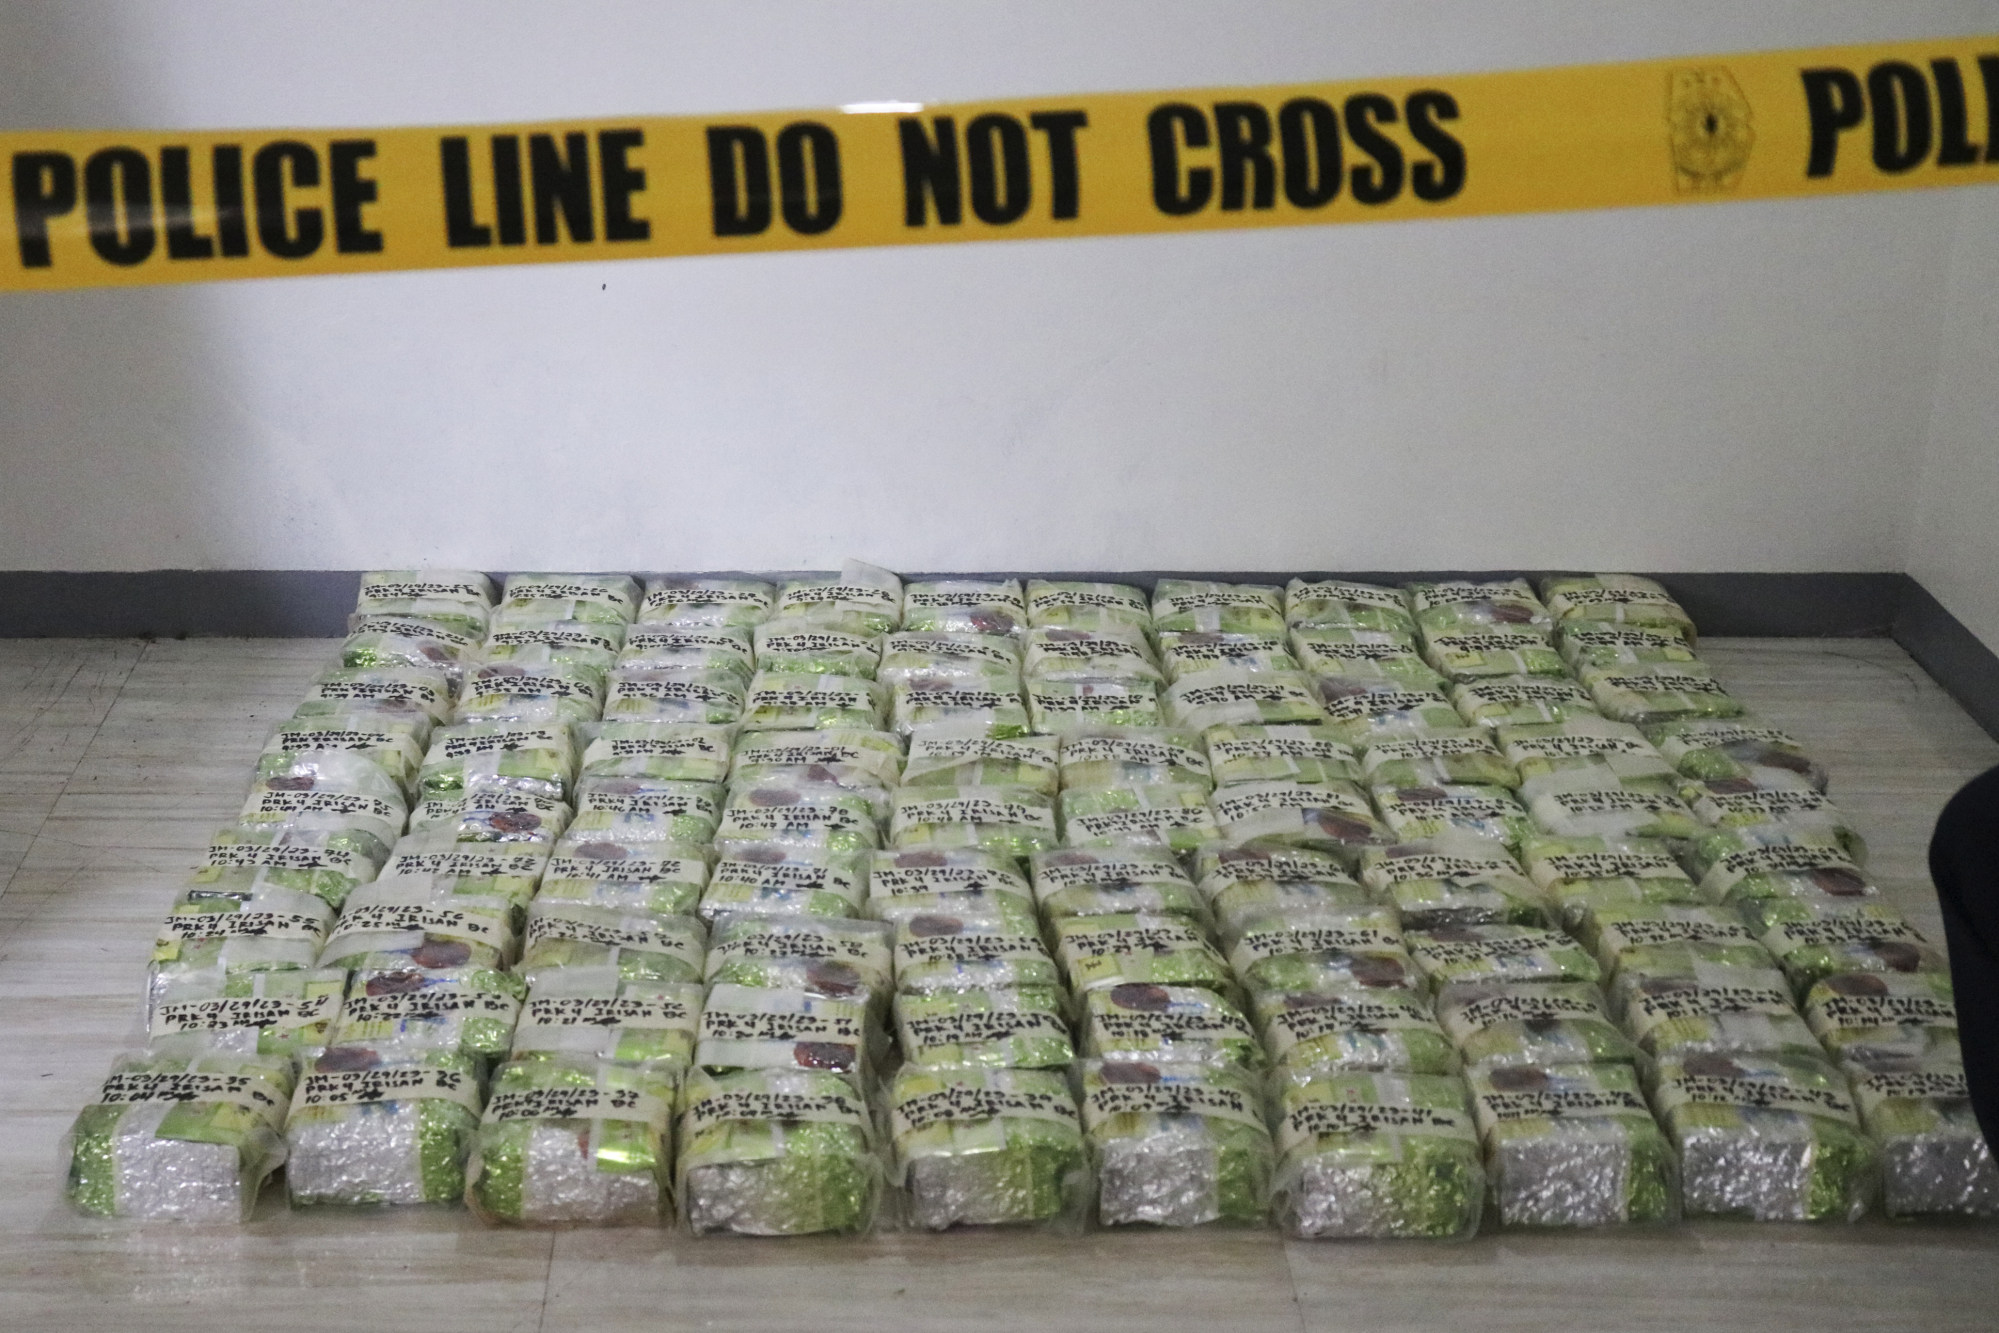 A drug syndicate apparently hid the suspected drugs in Baguio, a popular tourism destination known for its mountain scenery and pine trees, and not in metropolitan Manila due to an ongoing anti-drugs crackdown in the capital region. Photo: via AP